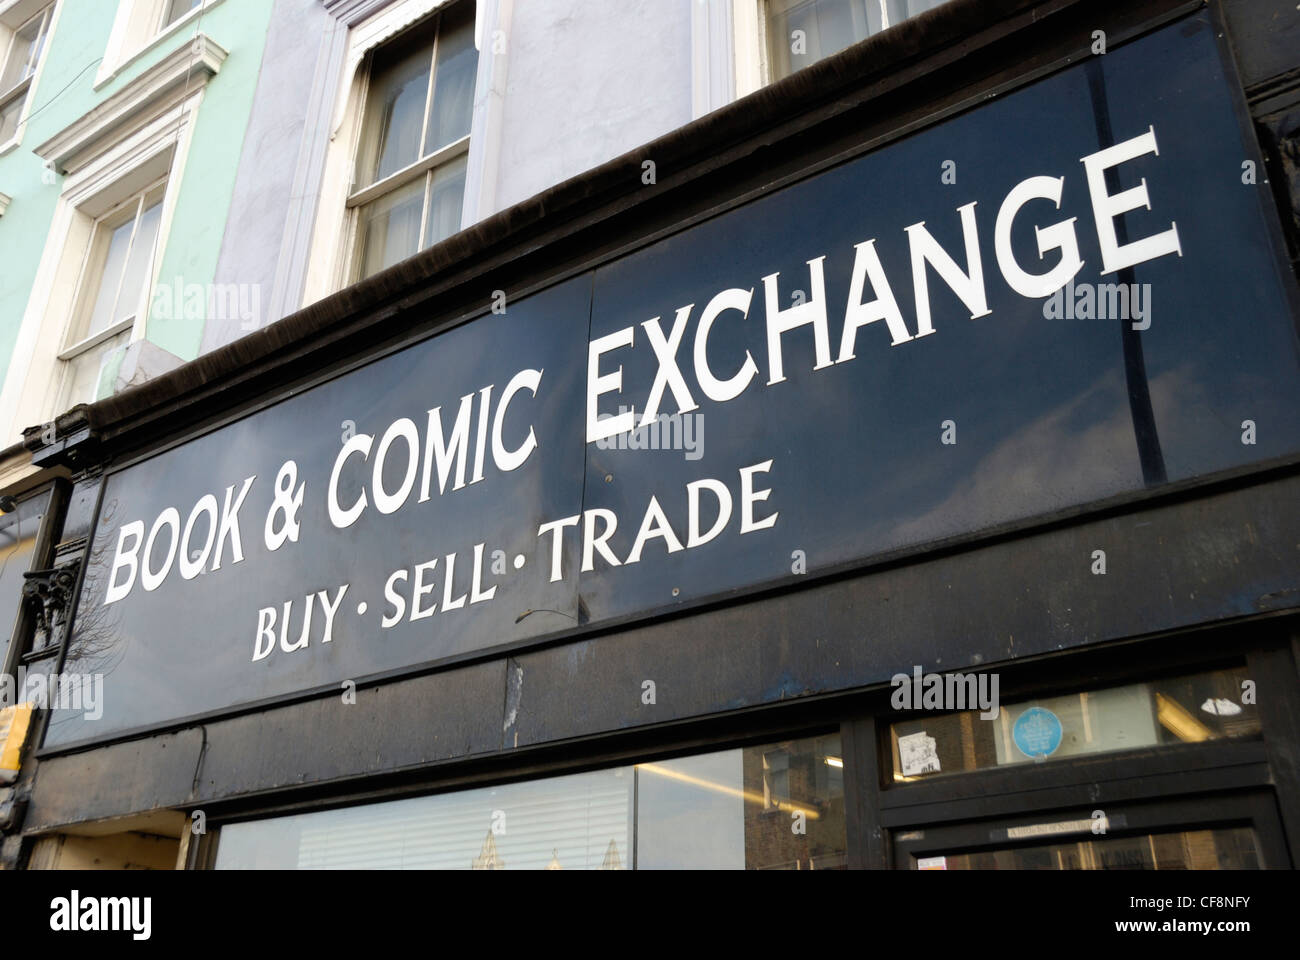 Book and Comic Exchange, sign, Notting Hill Gate, book, comic, books, comics, exchange, trading, London, England, Stock Photo